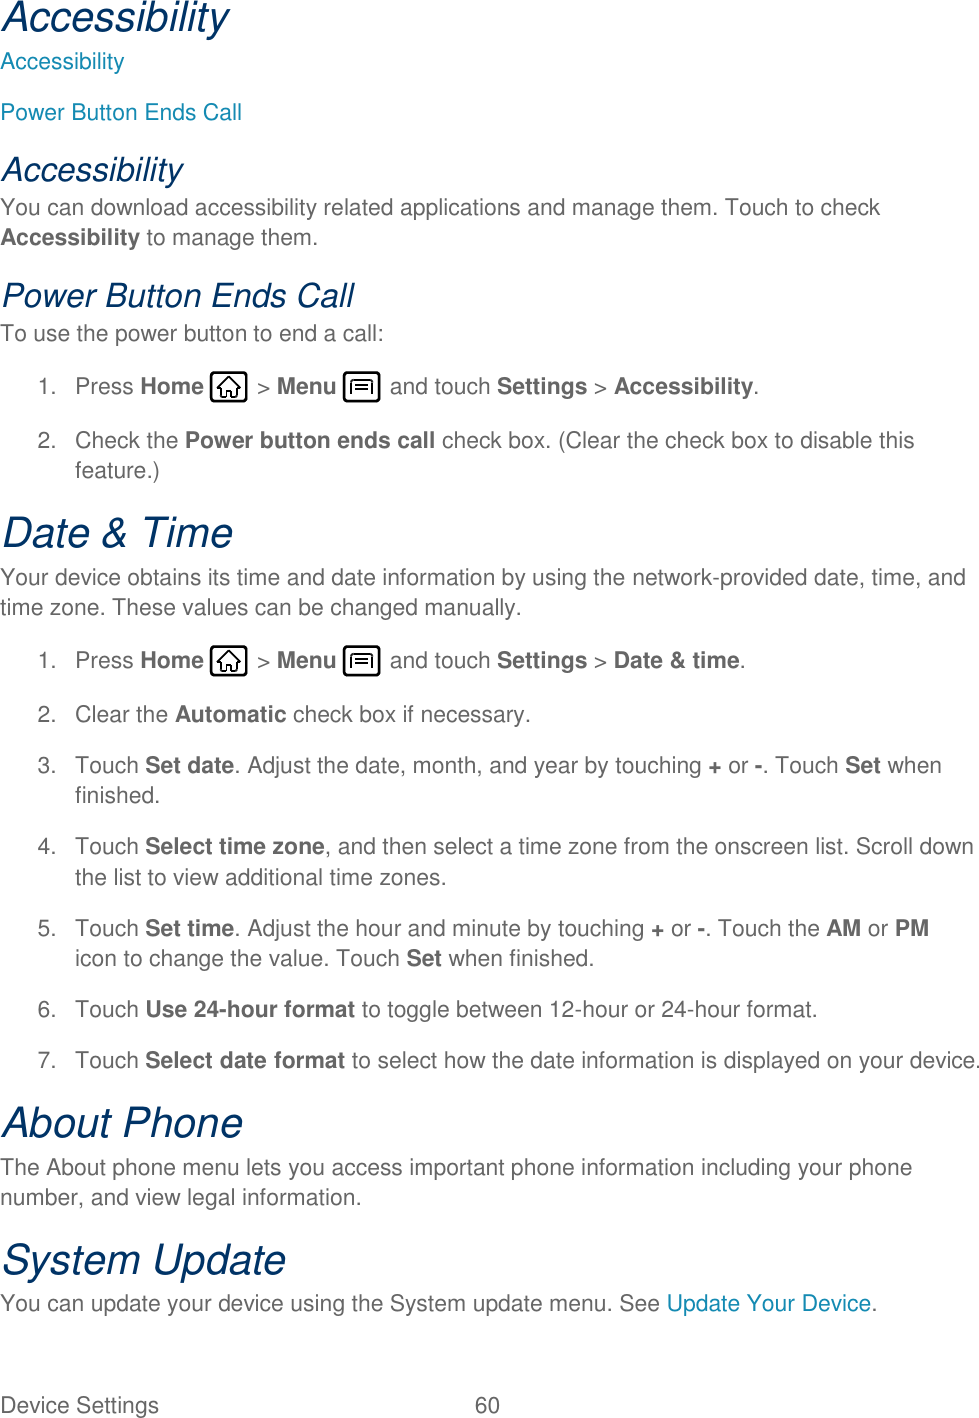 Device Settings  60   Accessibility Accessibility Power Button Ends Call Accessibility You can download accessibility related applications and manage them. Touch to check Accessibility to manage them. Power Button Ends Call To use the power button to end a call: 1.  Press Home   &gt; Menu   and touch Settings &gt; Accessibility. 2.  Check the Power button ends call check box. (Clear the check box to disable this feature.) Date &amp; Time Your device obtains its time and date information by using the network-provided date, time, and time zone. These values can be changed manually. 1.  Press Home   &gt; Menu   and touch Settings &gt; Date &amp; time. 2.  Clear the Automatic check box if necessary. 3.  Touch Set date. Adjust the date, month, and year by touching + or -. Touch Set when finished. 4.  Touch Select time zone, and then select a time zone from the onscreen list. Scroll down the list to view additional time zones. 5.  Touch Set time. Adjust the hour and minute by touching + or -. Touch the AM or PM icon to change the value. Touch Set when finished. 6.  Touch Use 24-hour format to toggle between 12-hour or 24-hour format. 7.  Touch Select date format to select how the date information is displayed on your device. About Phone The About phone menu lets you access important phone information including your phone number, and view legal information. System Update You can update your device using the System update menu. See Update Your Device. 